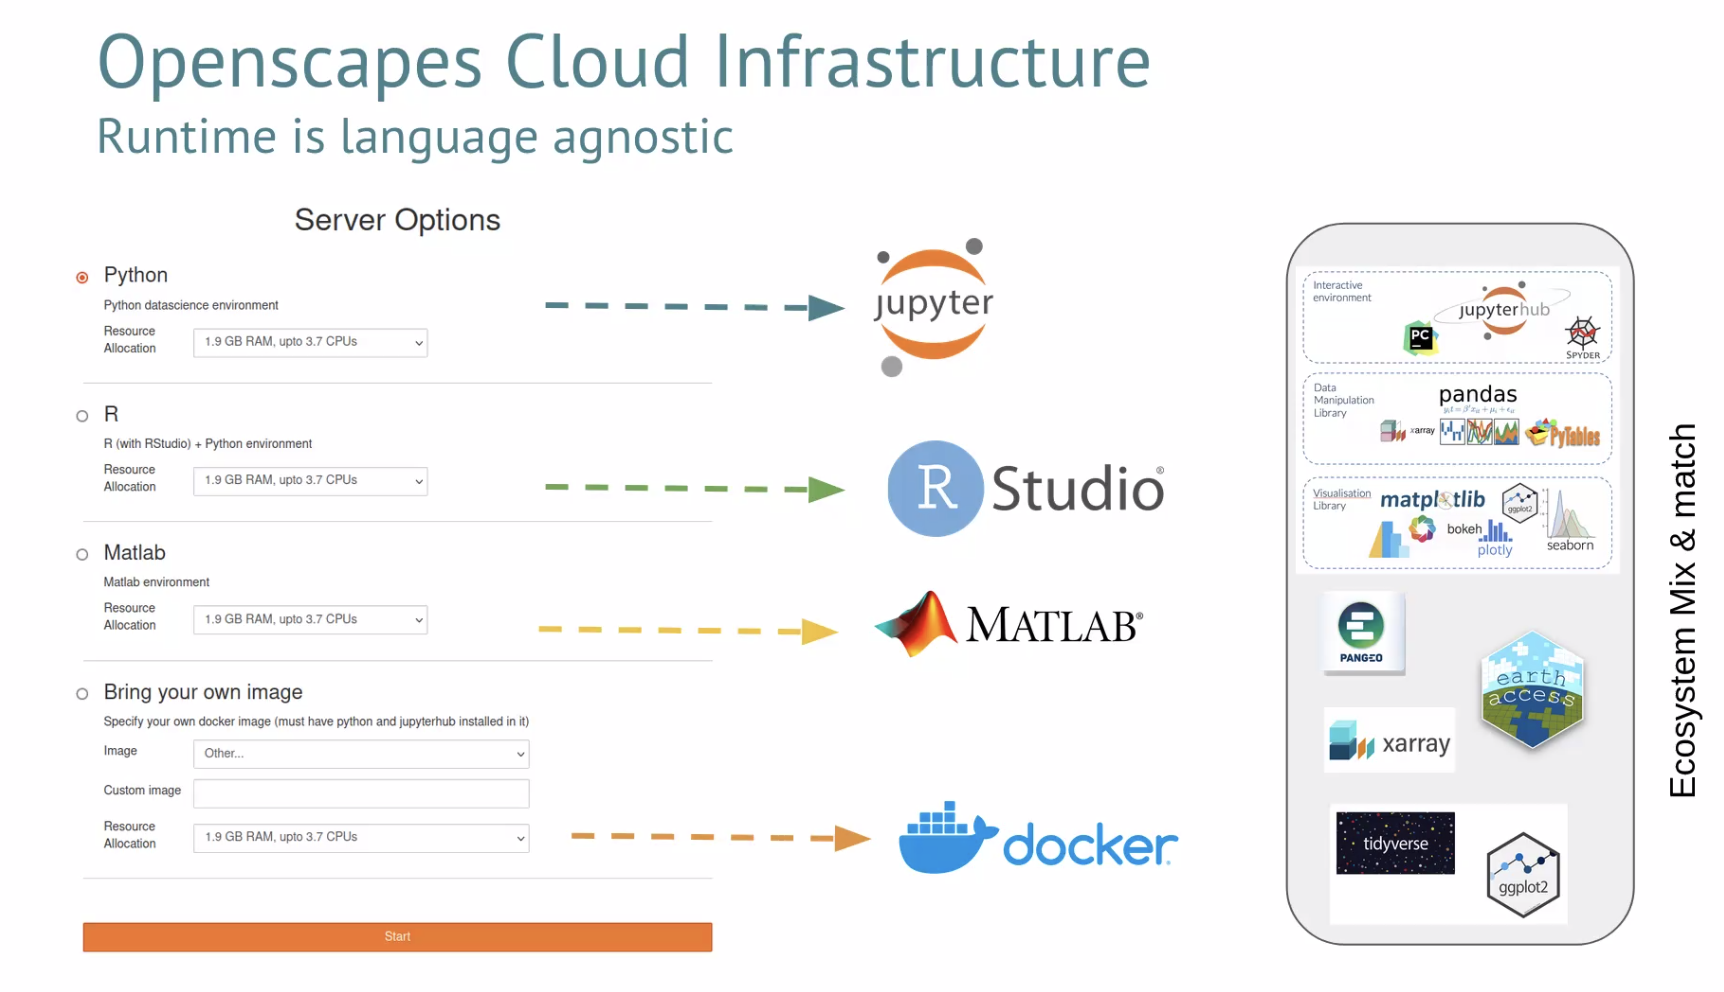 slide title 'Openscapes Cloud Infrastructure. Runtime is language agnostic'. Text to right 'Ecosystem Mix & match', Image of device with ecosystem logos. Left side image of 2i2c Cloud server options showing logos for Jupyter, RStudio, MATLAB, and docker